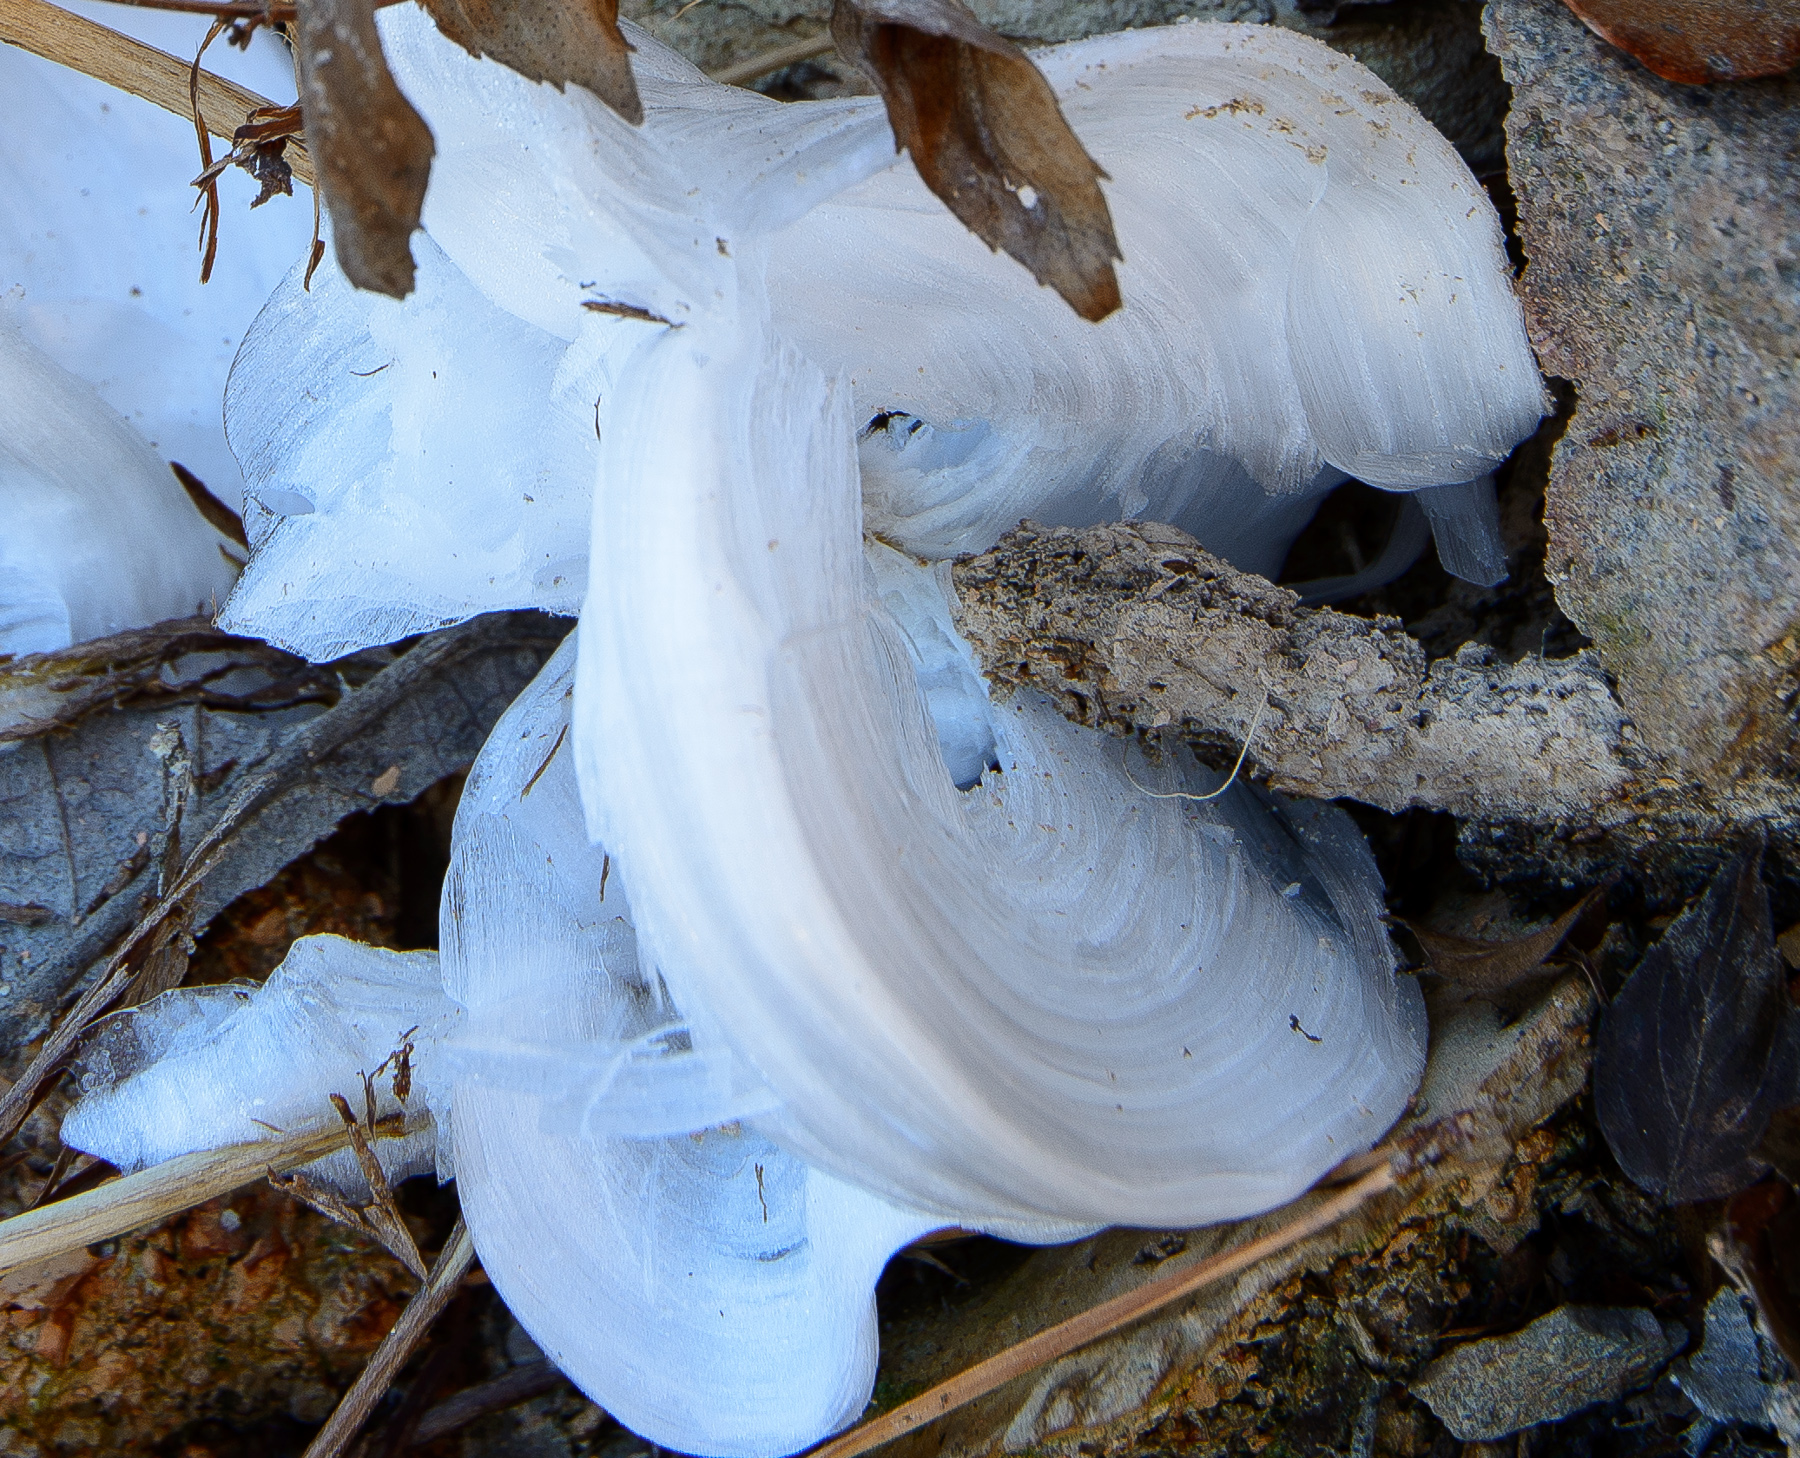 Hickory Nut Mountain and Frost Flowers!